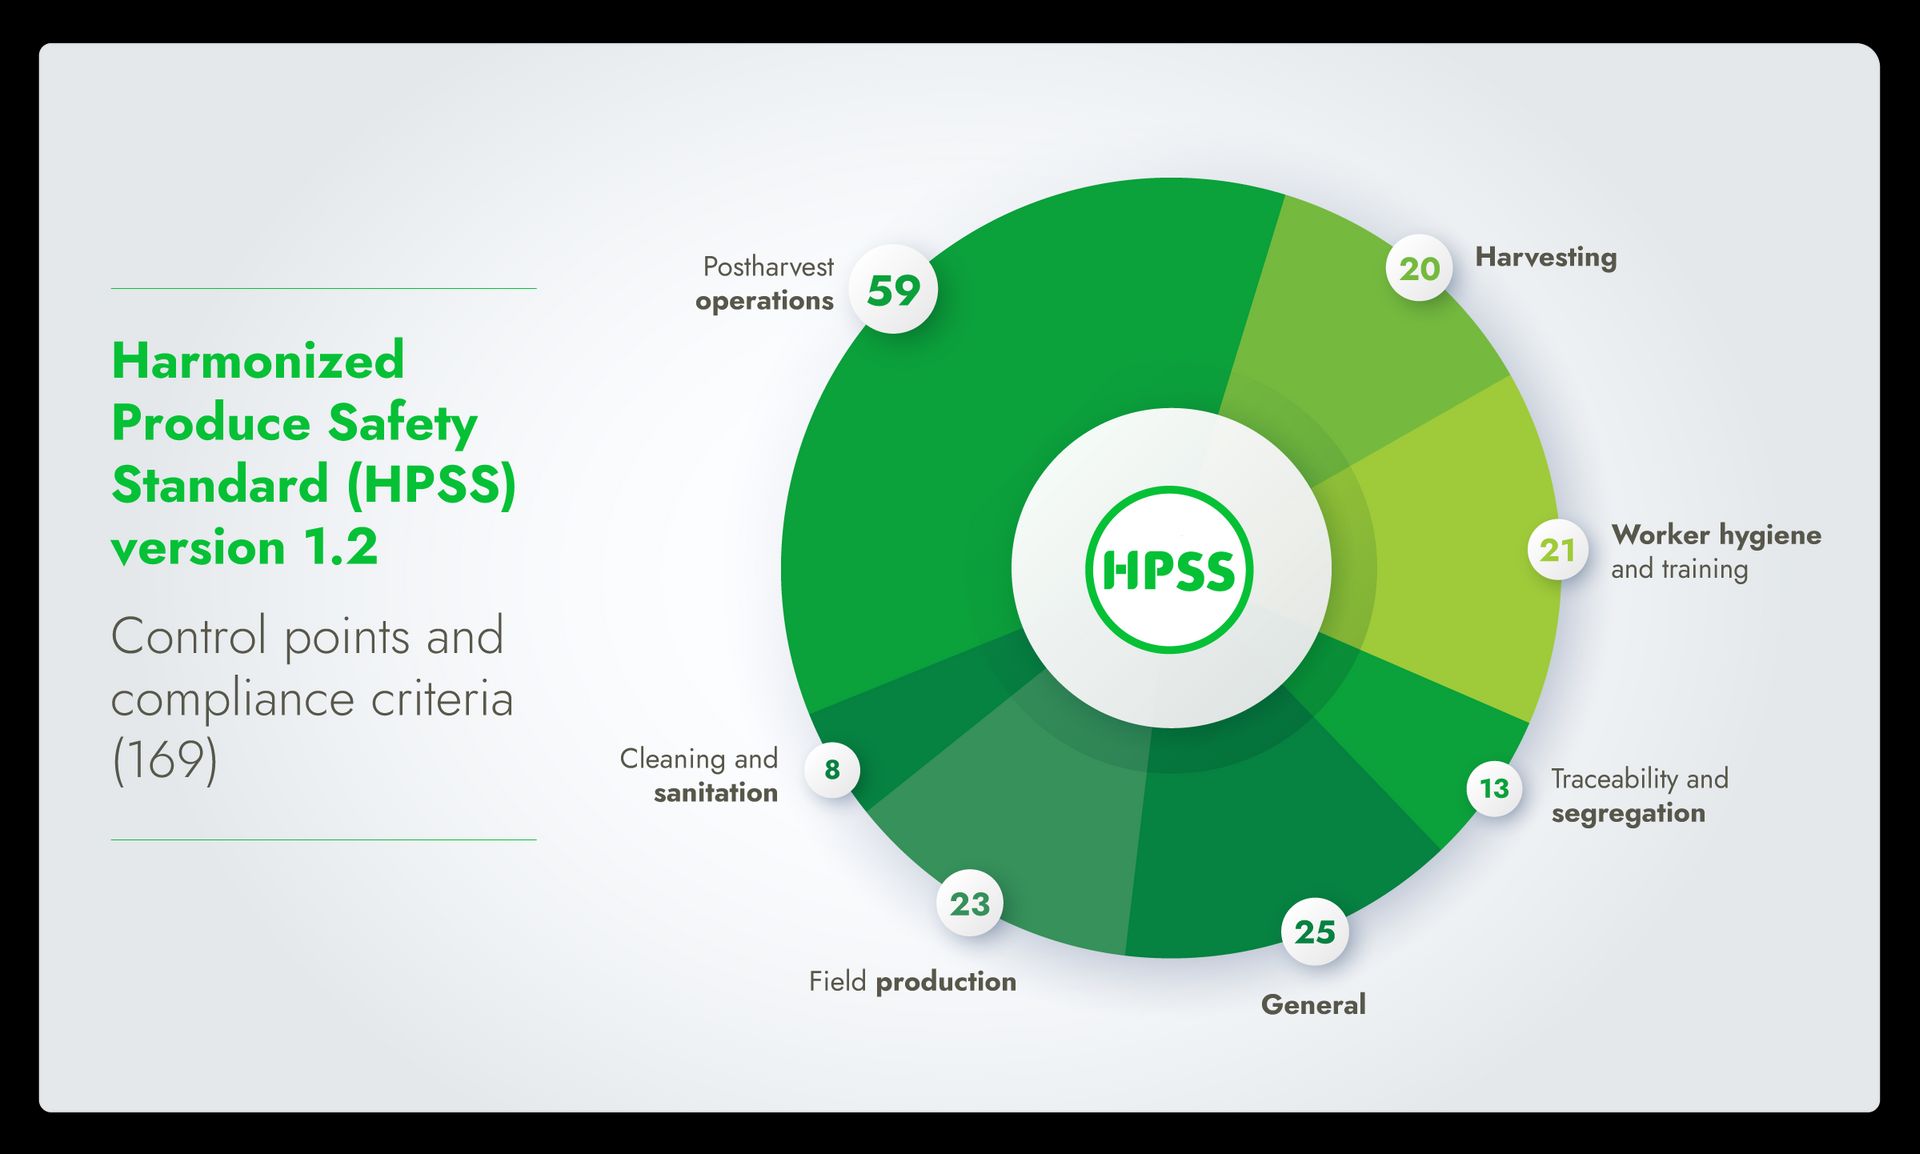 Infographic showing the control points and compliance criteria of the Harmonized Produce Safety Standard version 1.2